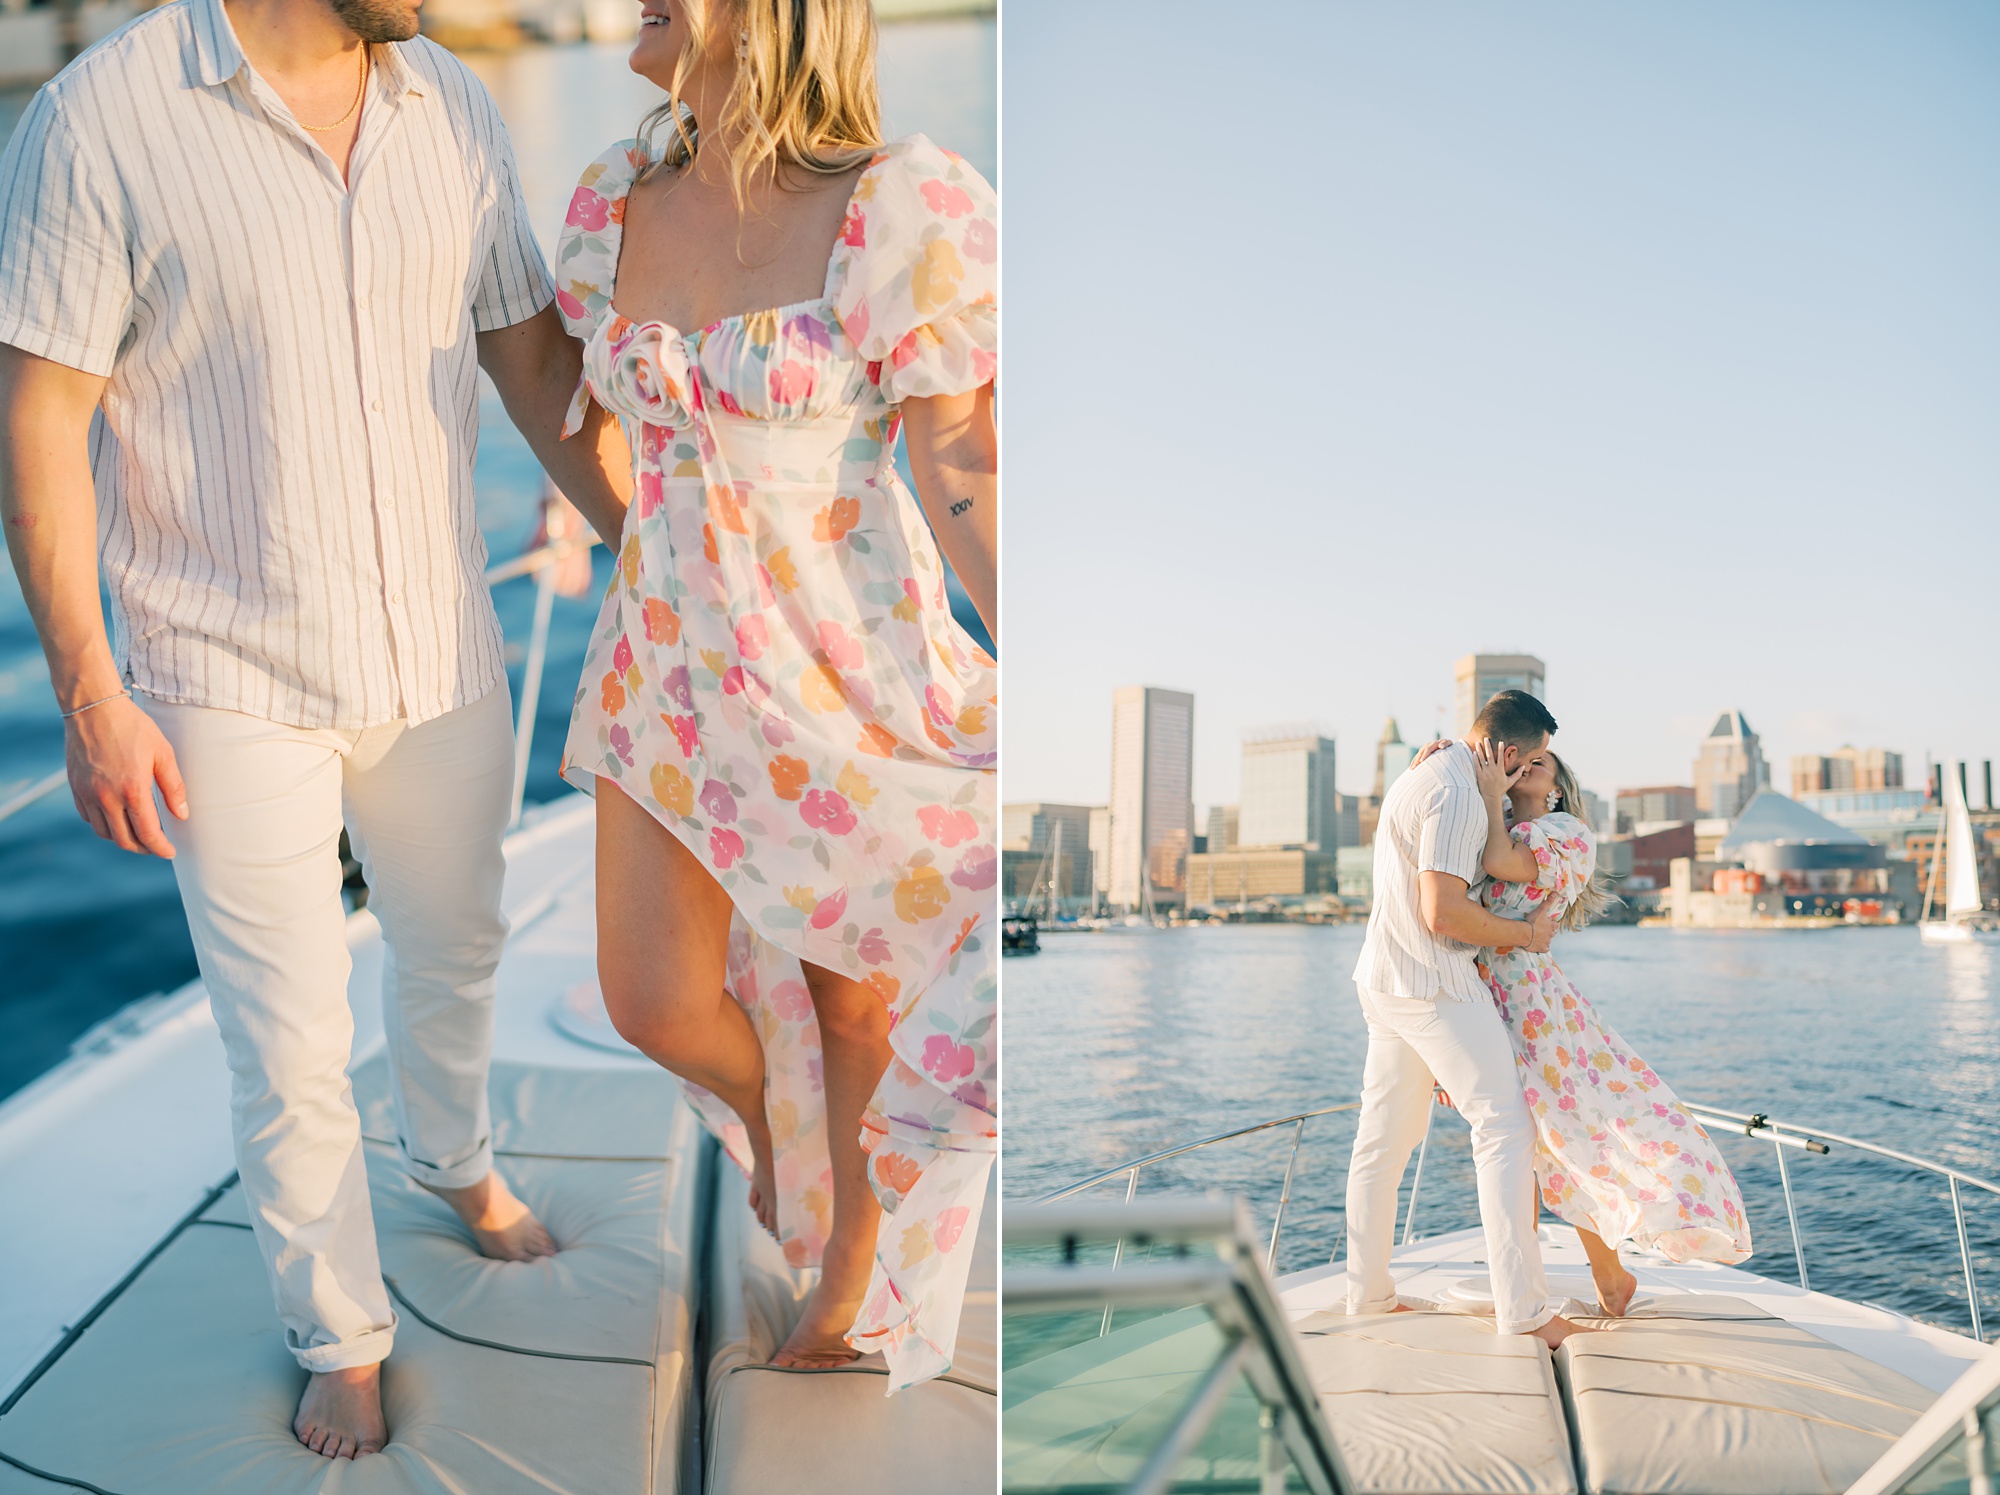 man in white linen outfit holds hands with woman in floral dress during engagement portraits on boat in the Inner Harbor